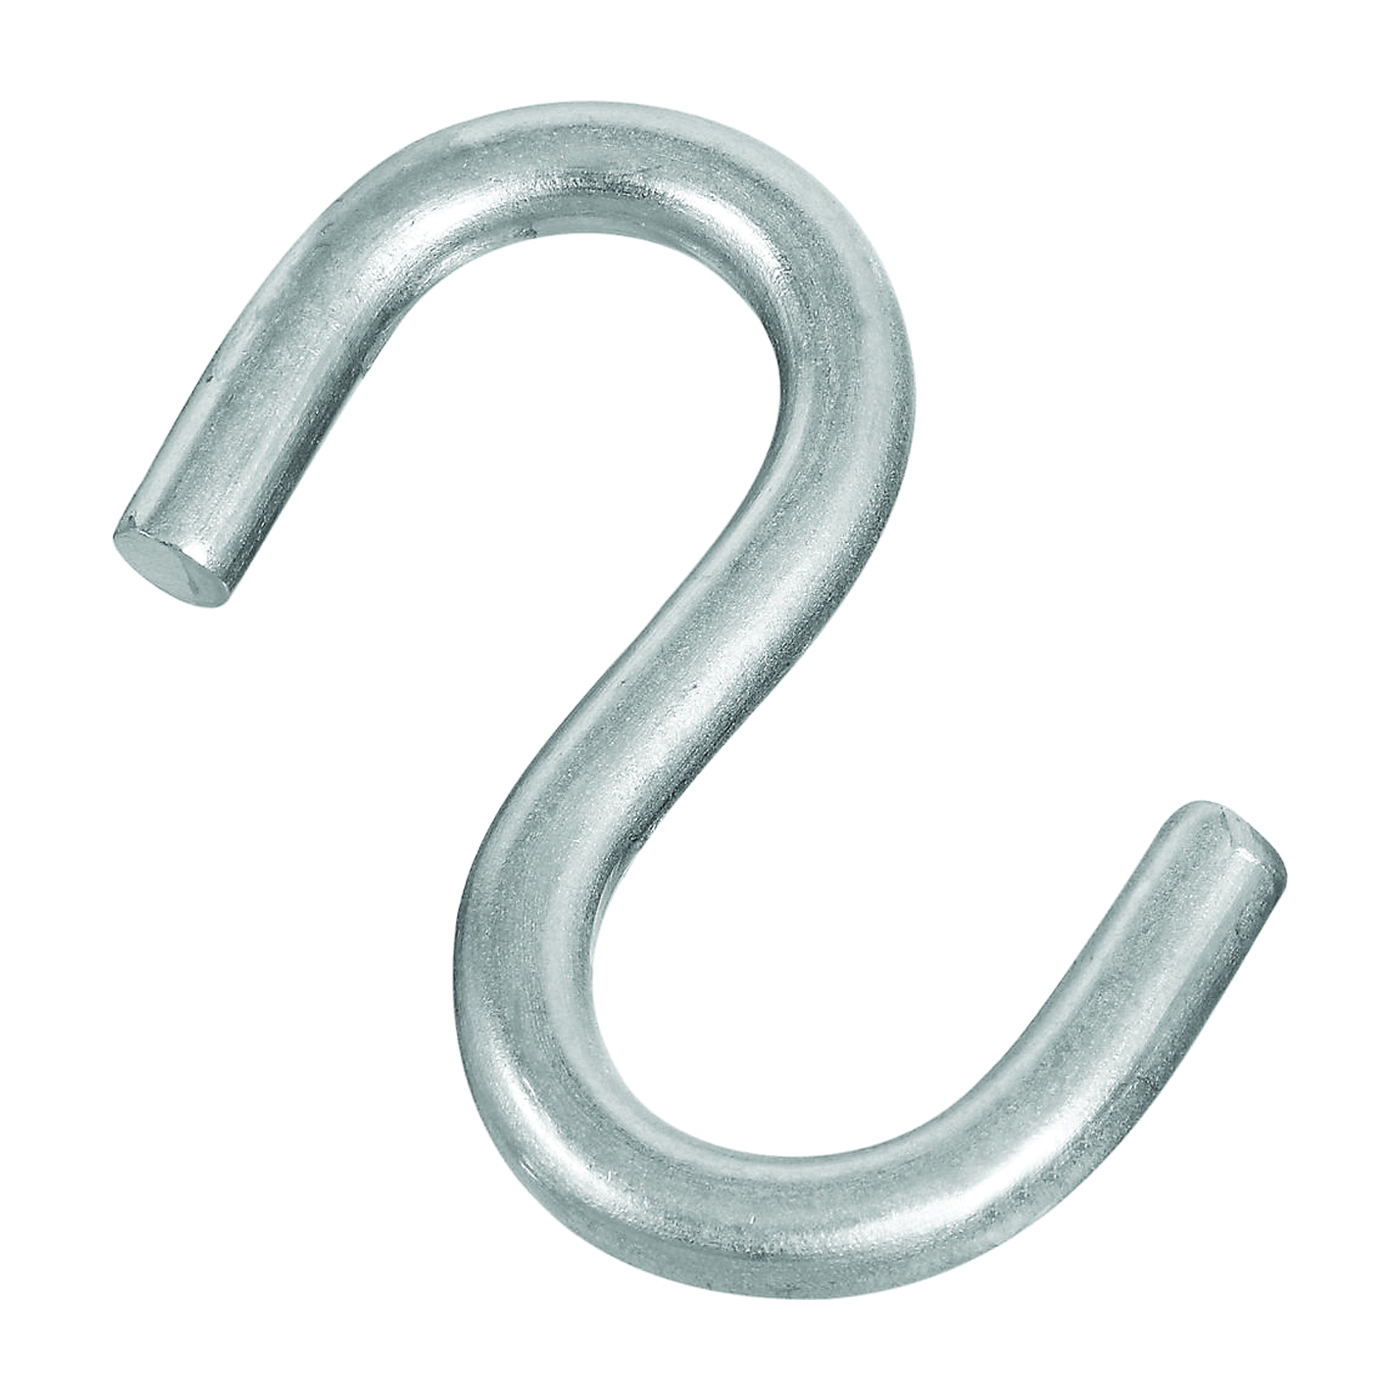 N233-544 S-Hook, 135 lb Working Load, 0.26 in Dia Wire, Stainless Steel, Stainless Steel